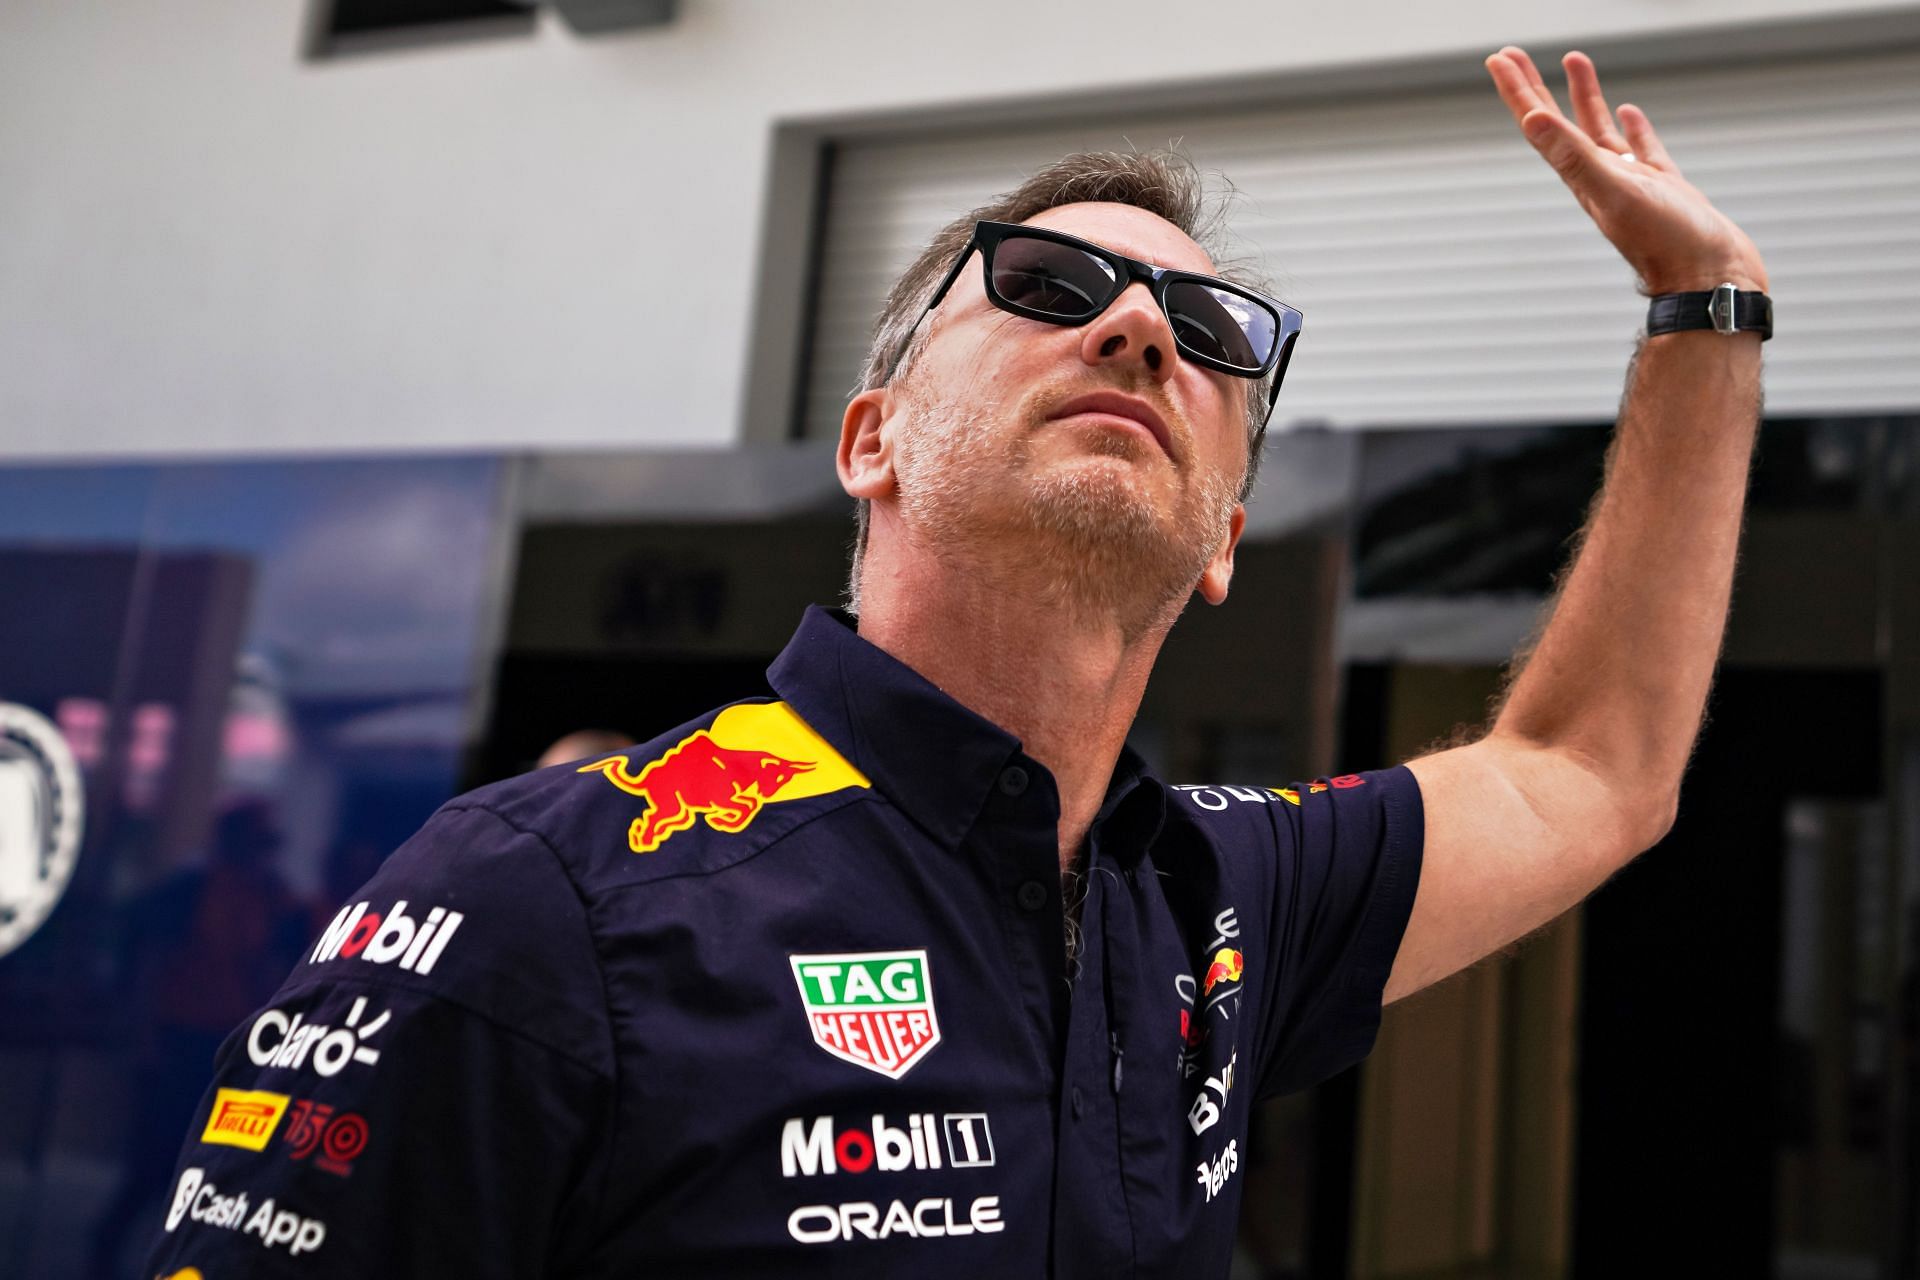 Christian Horner walks in the paddock during the 2022 F1 Miami GP weekend (Photo by Alex Bierens de Haan/Getty Images)